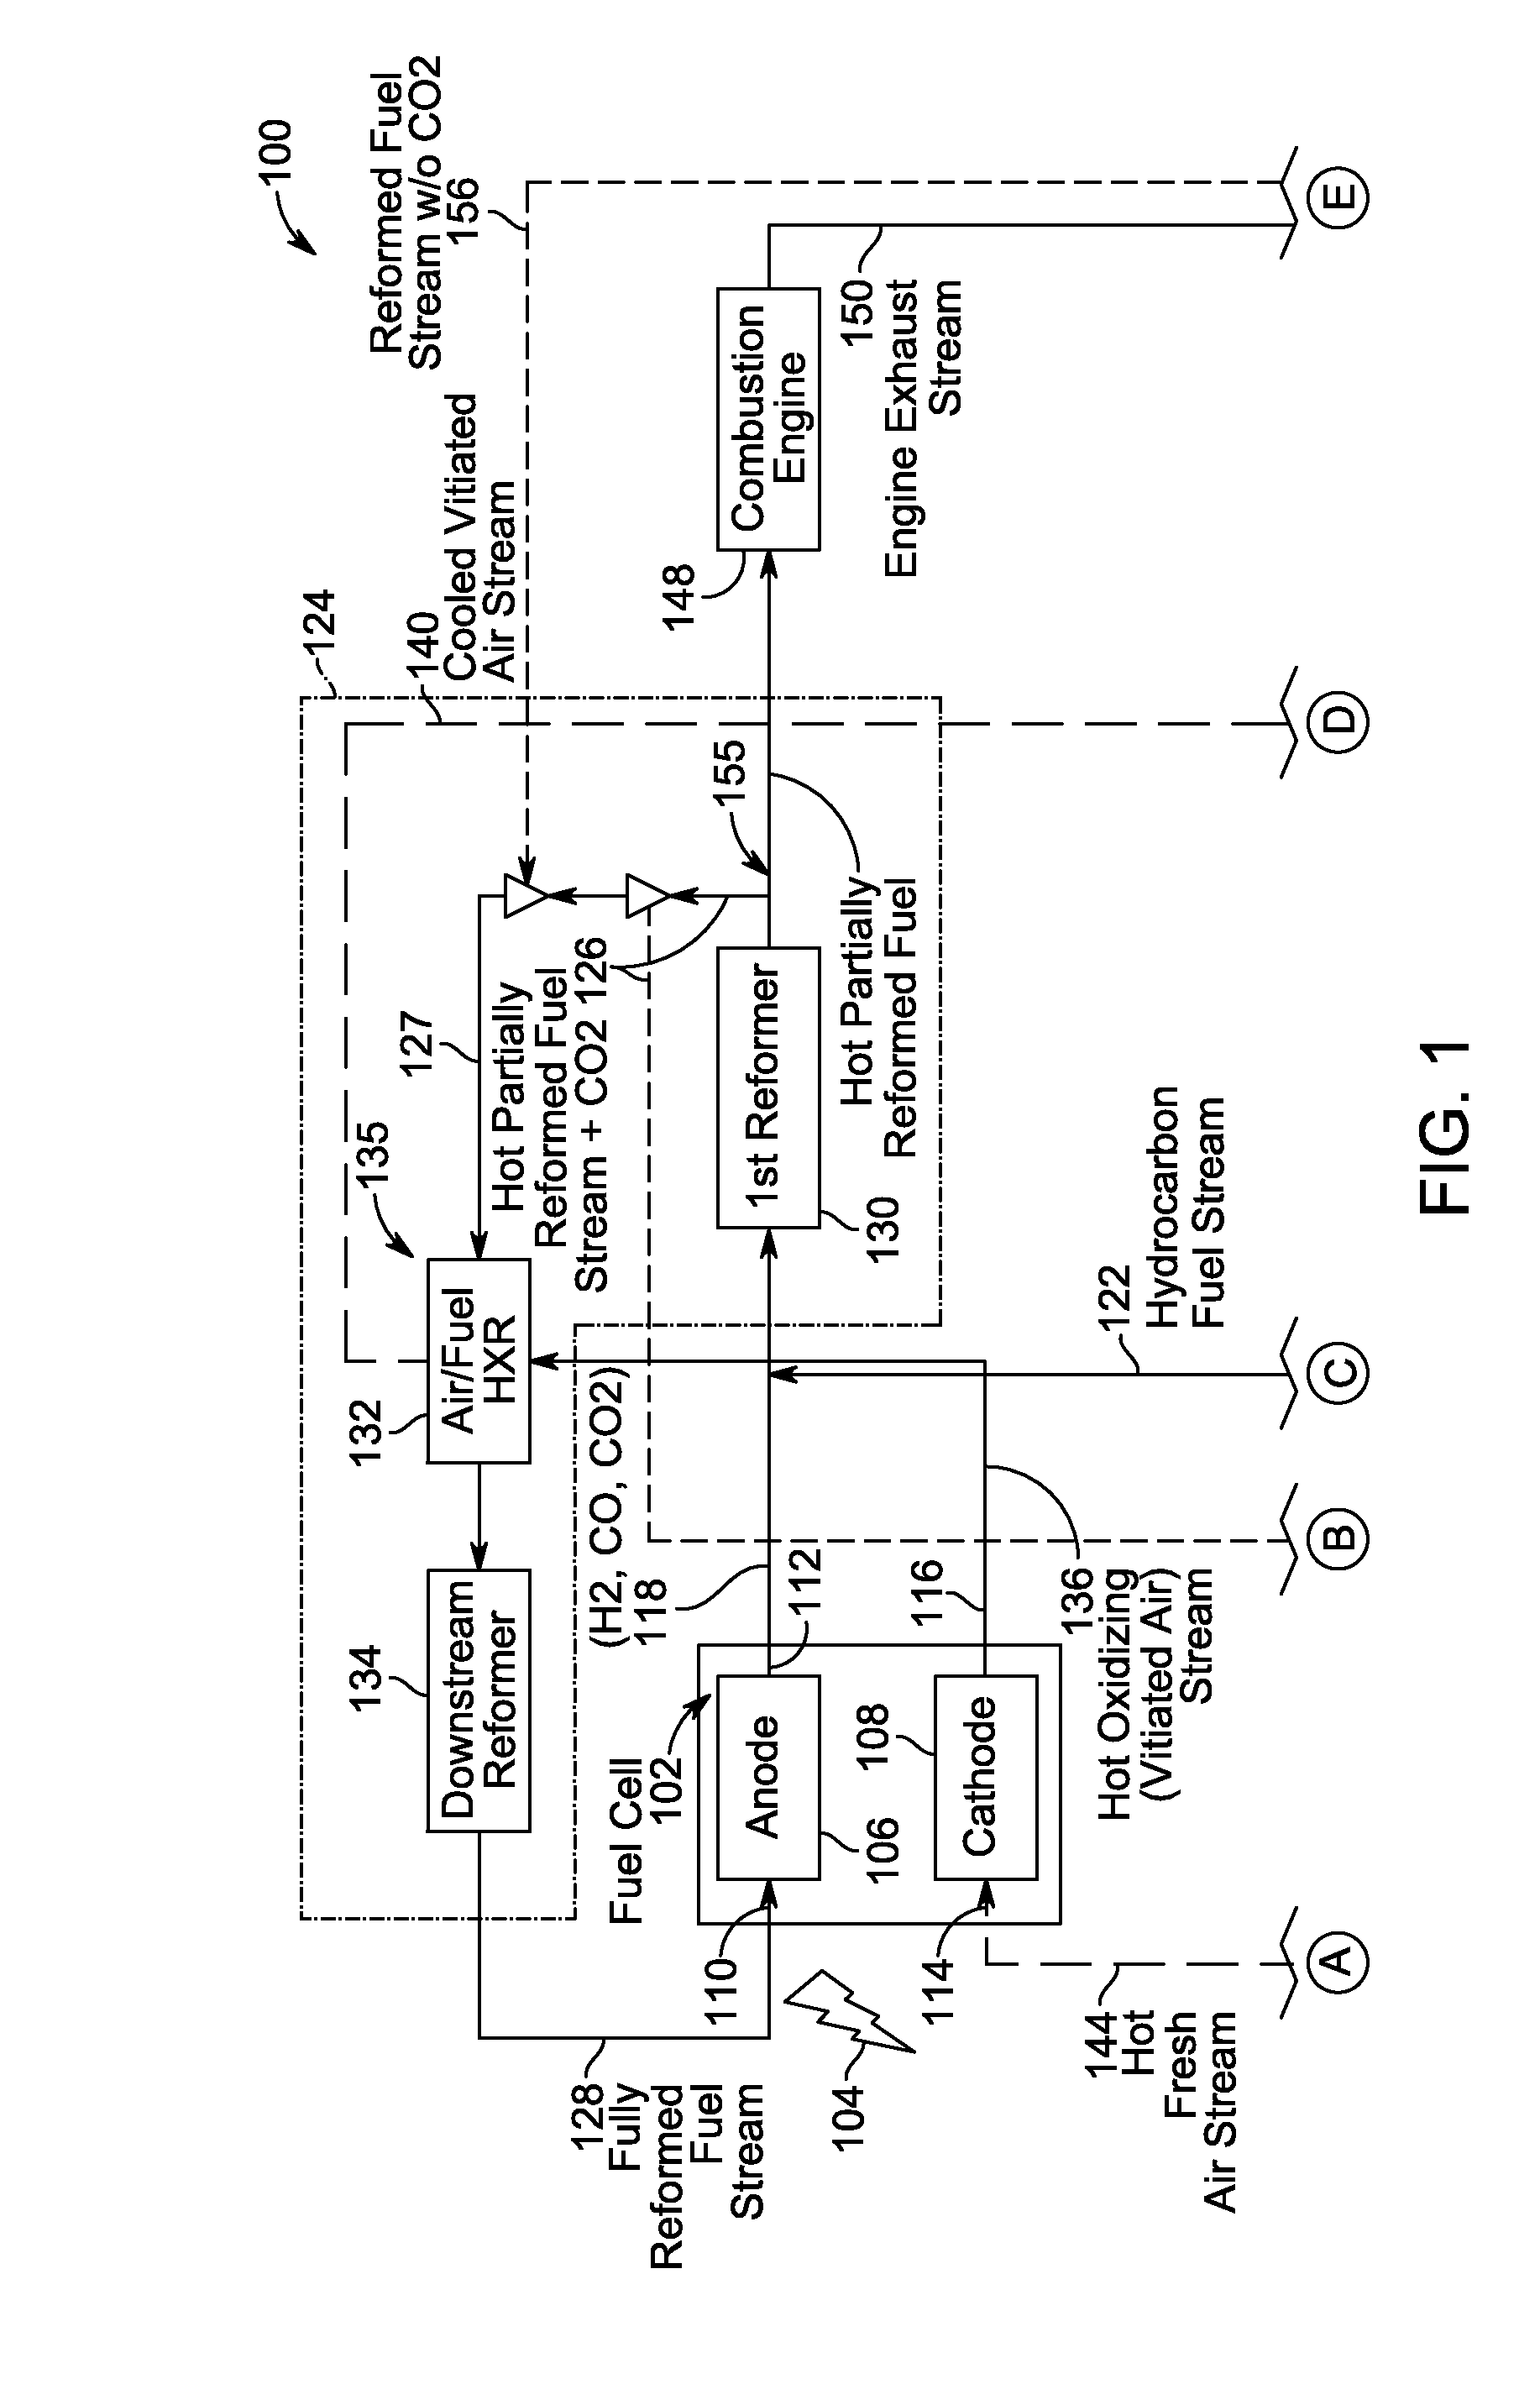 Fuel cell reforming system with carbon dioxide removal